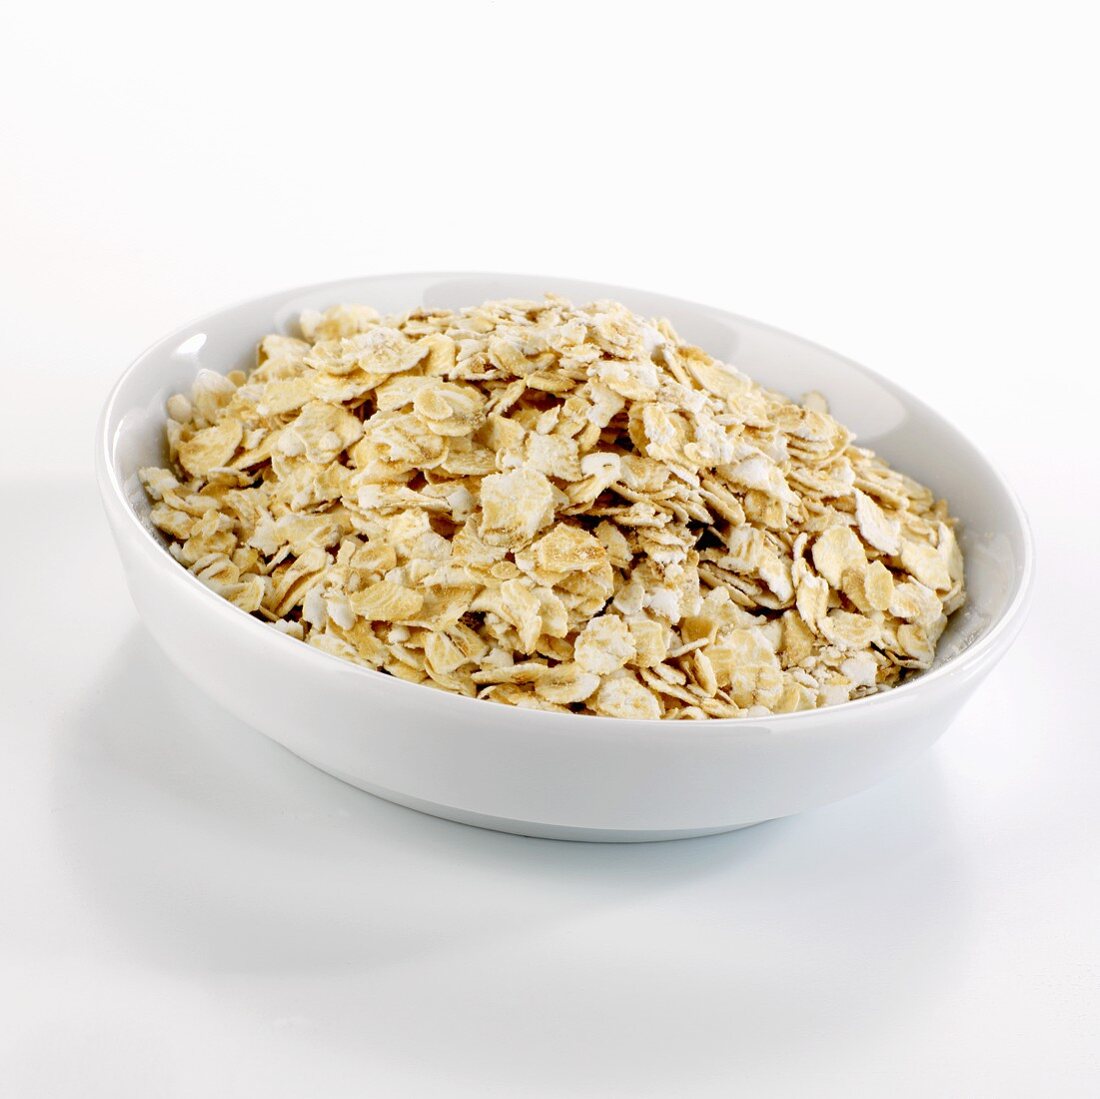 Organic rolled oats in a dish